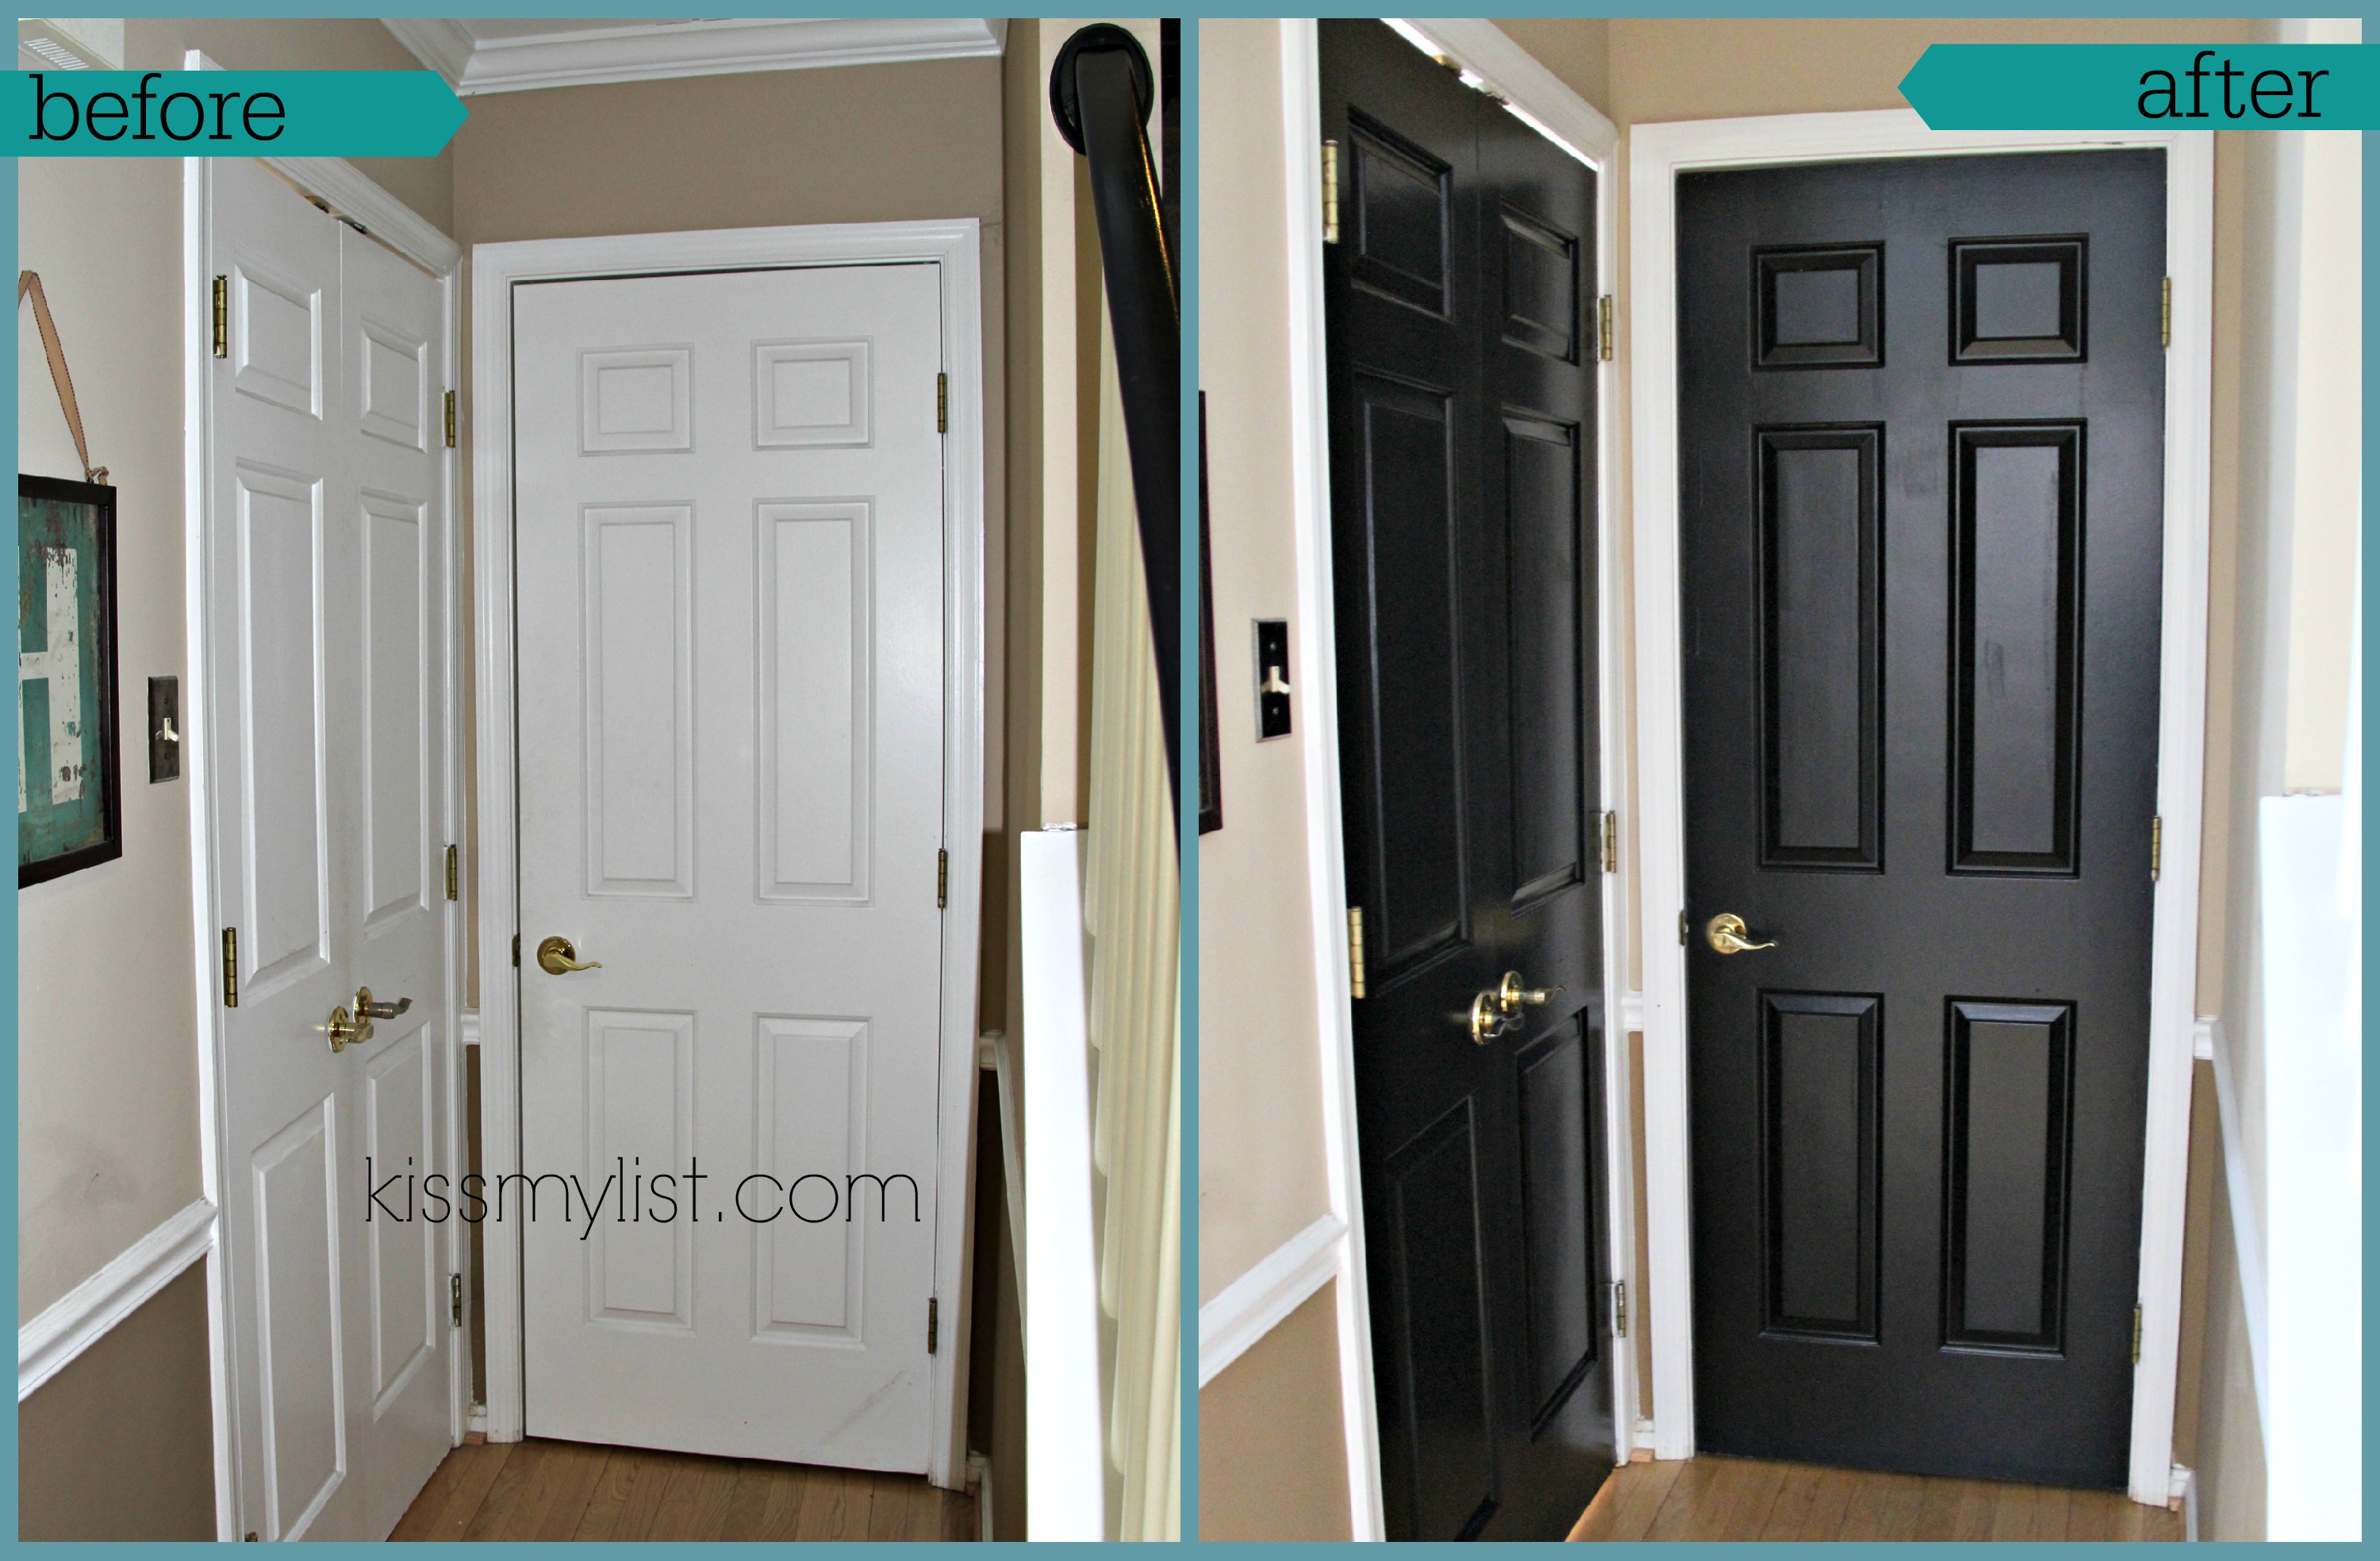 painting old interior doors black before and after